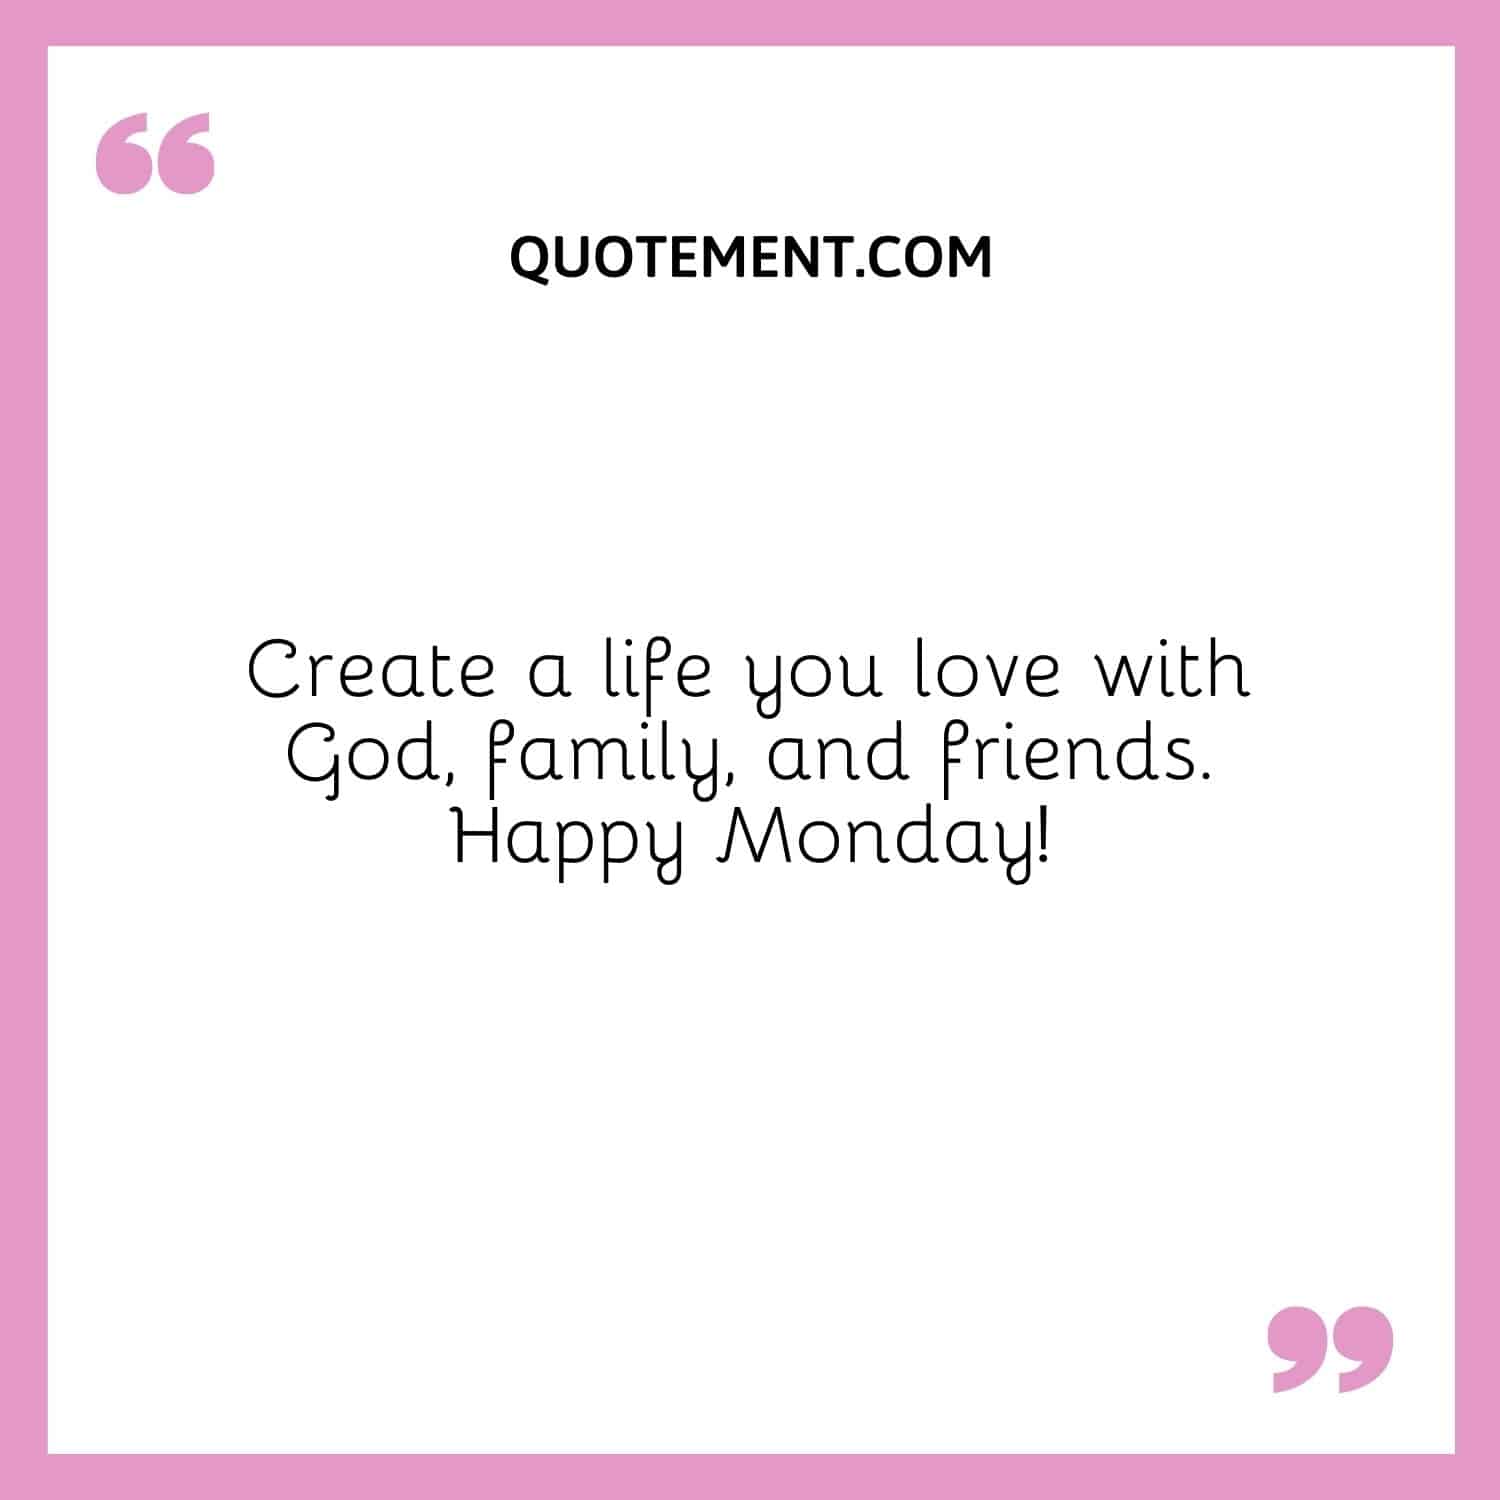 Create a life you love with God, family, and friends.